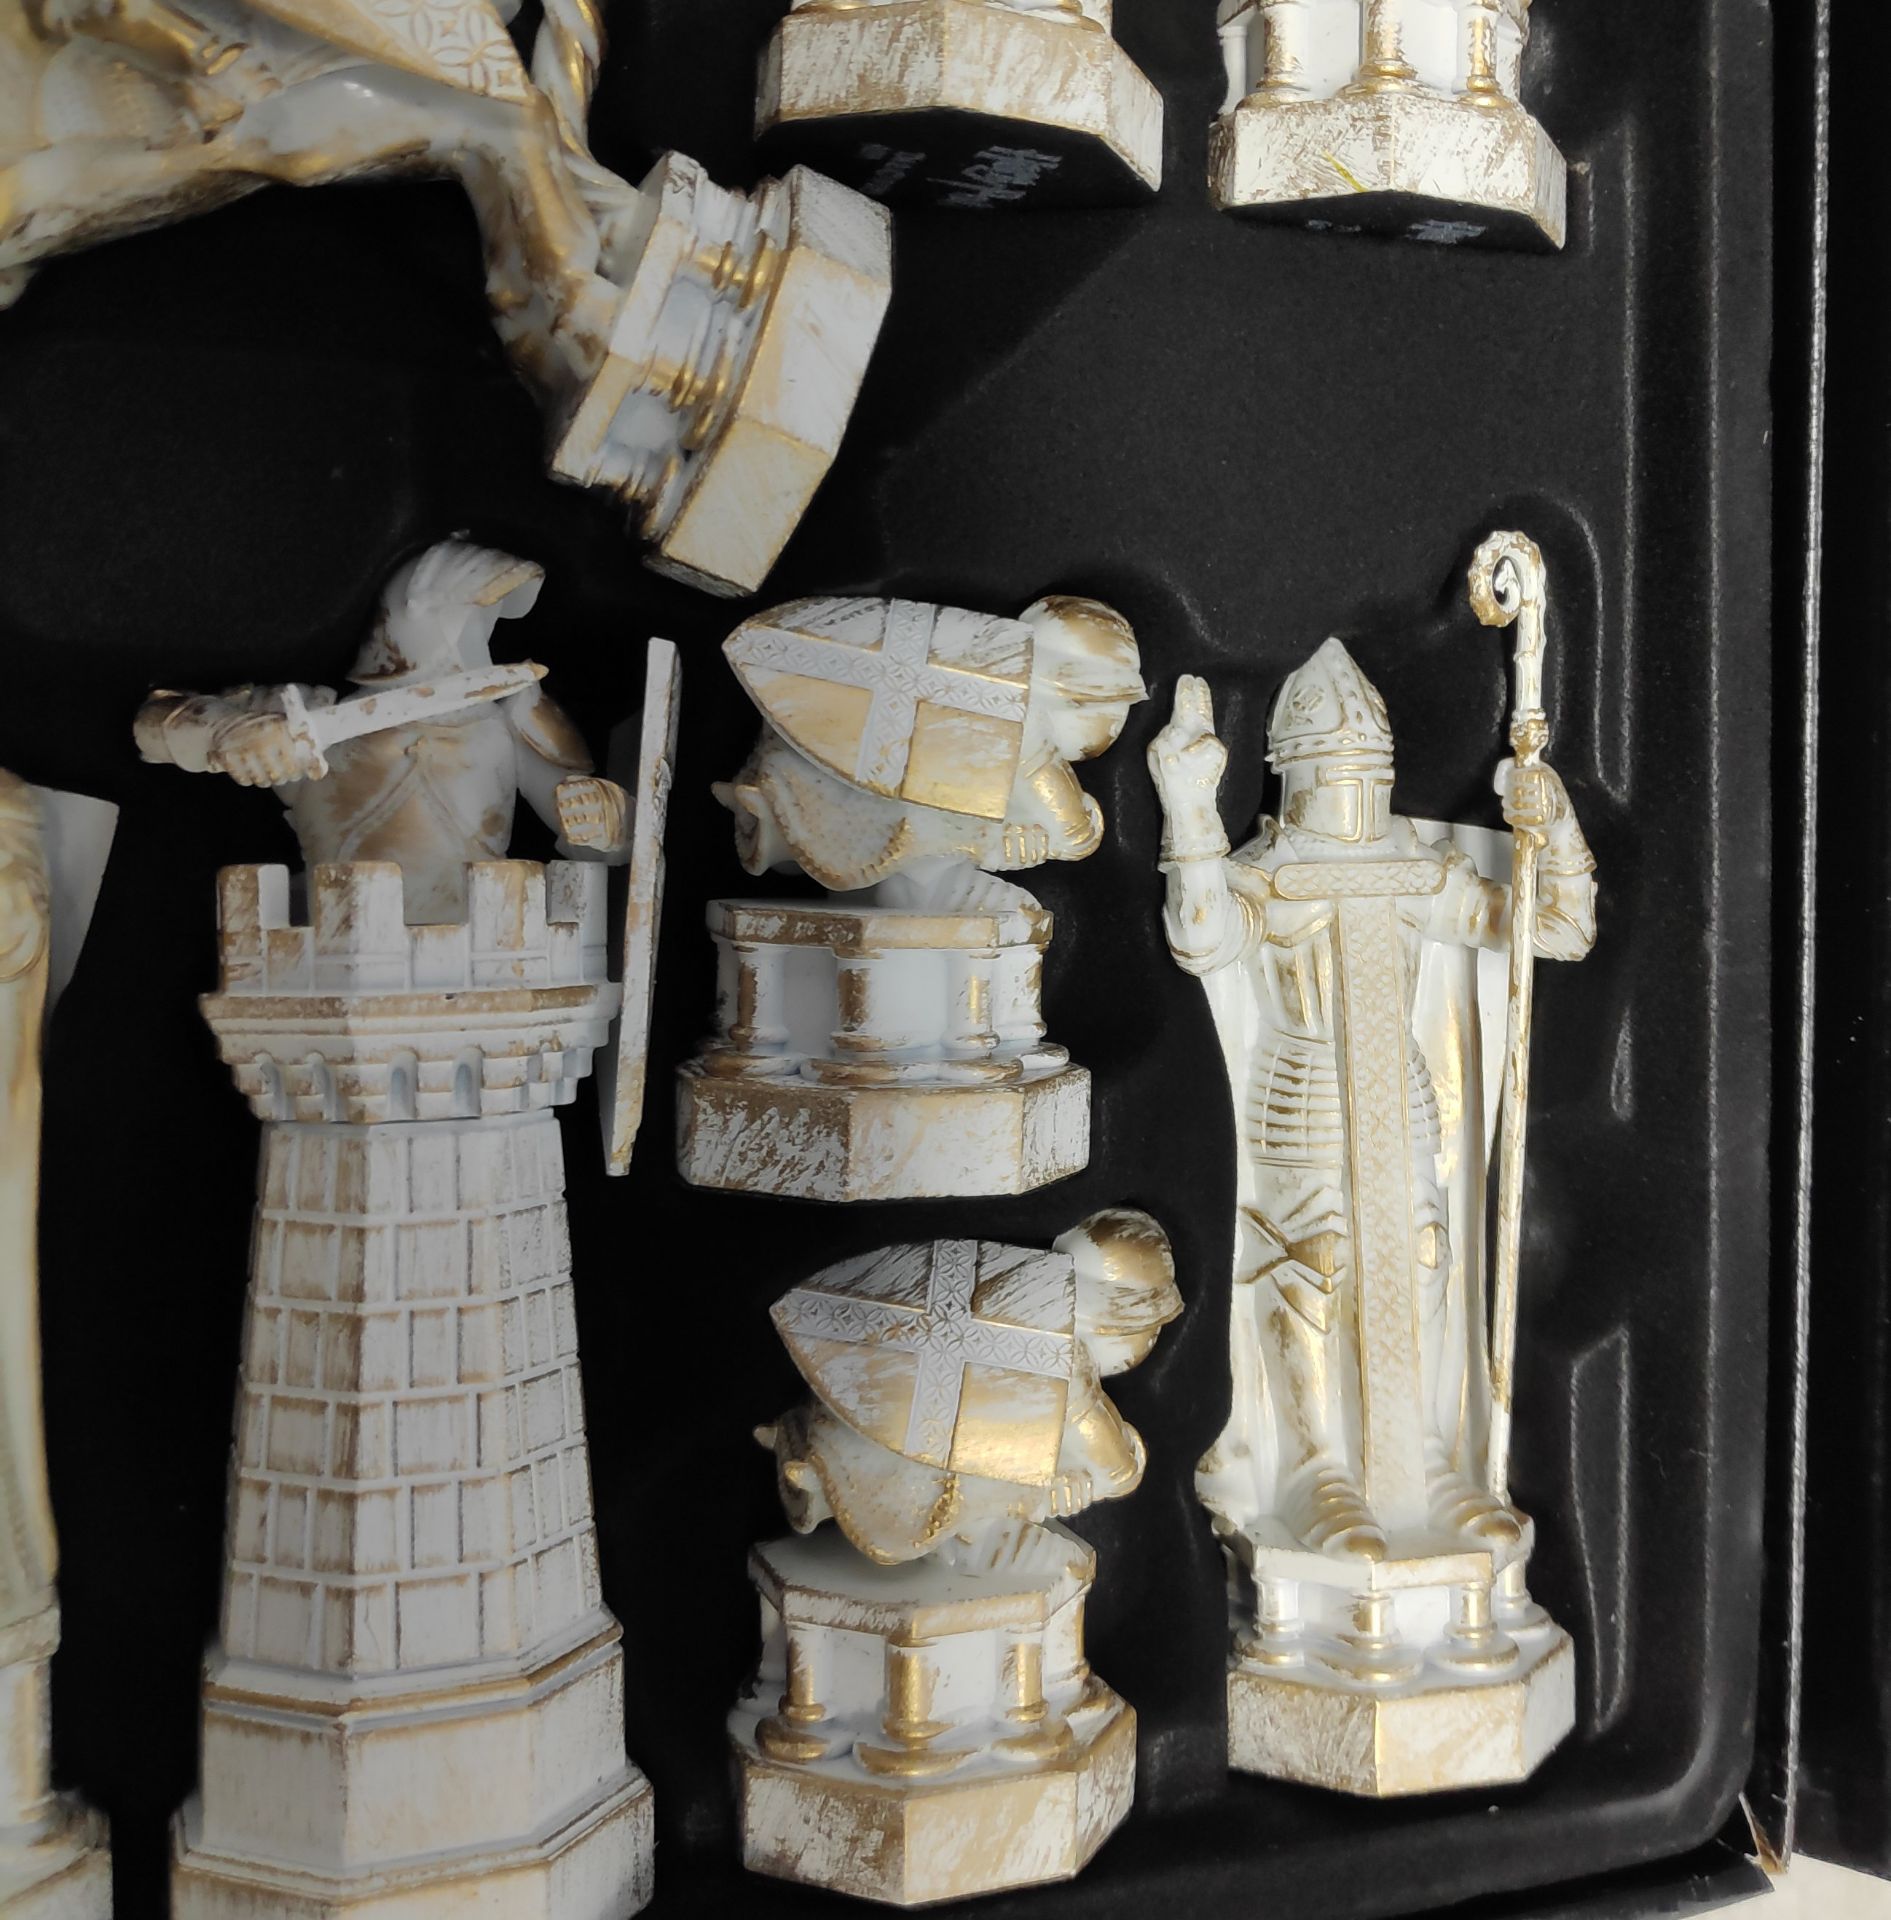 1 x The Noble Collection Harry Potter Final Challenge Limited Edition Chess Set - Image 4 of 20